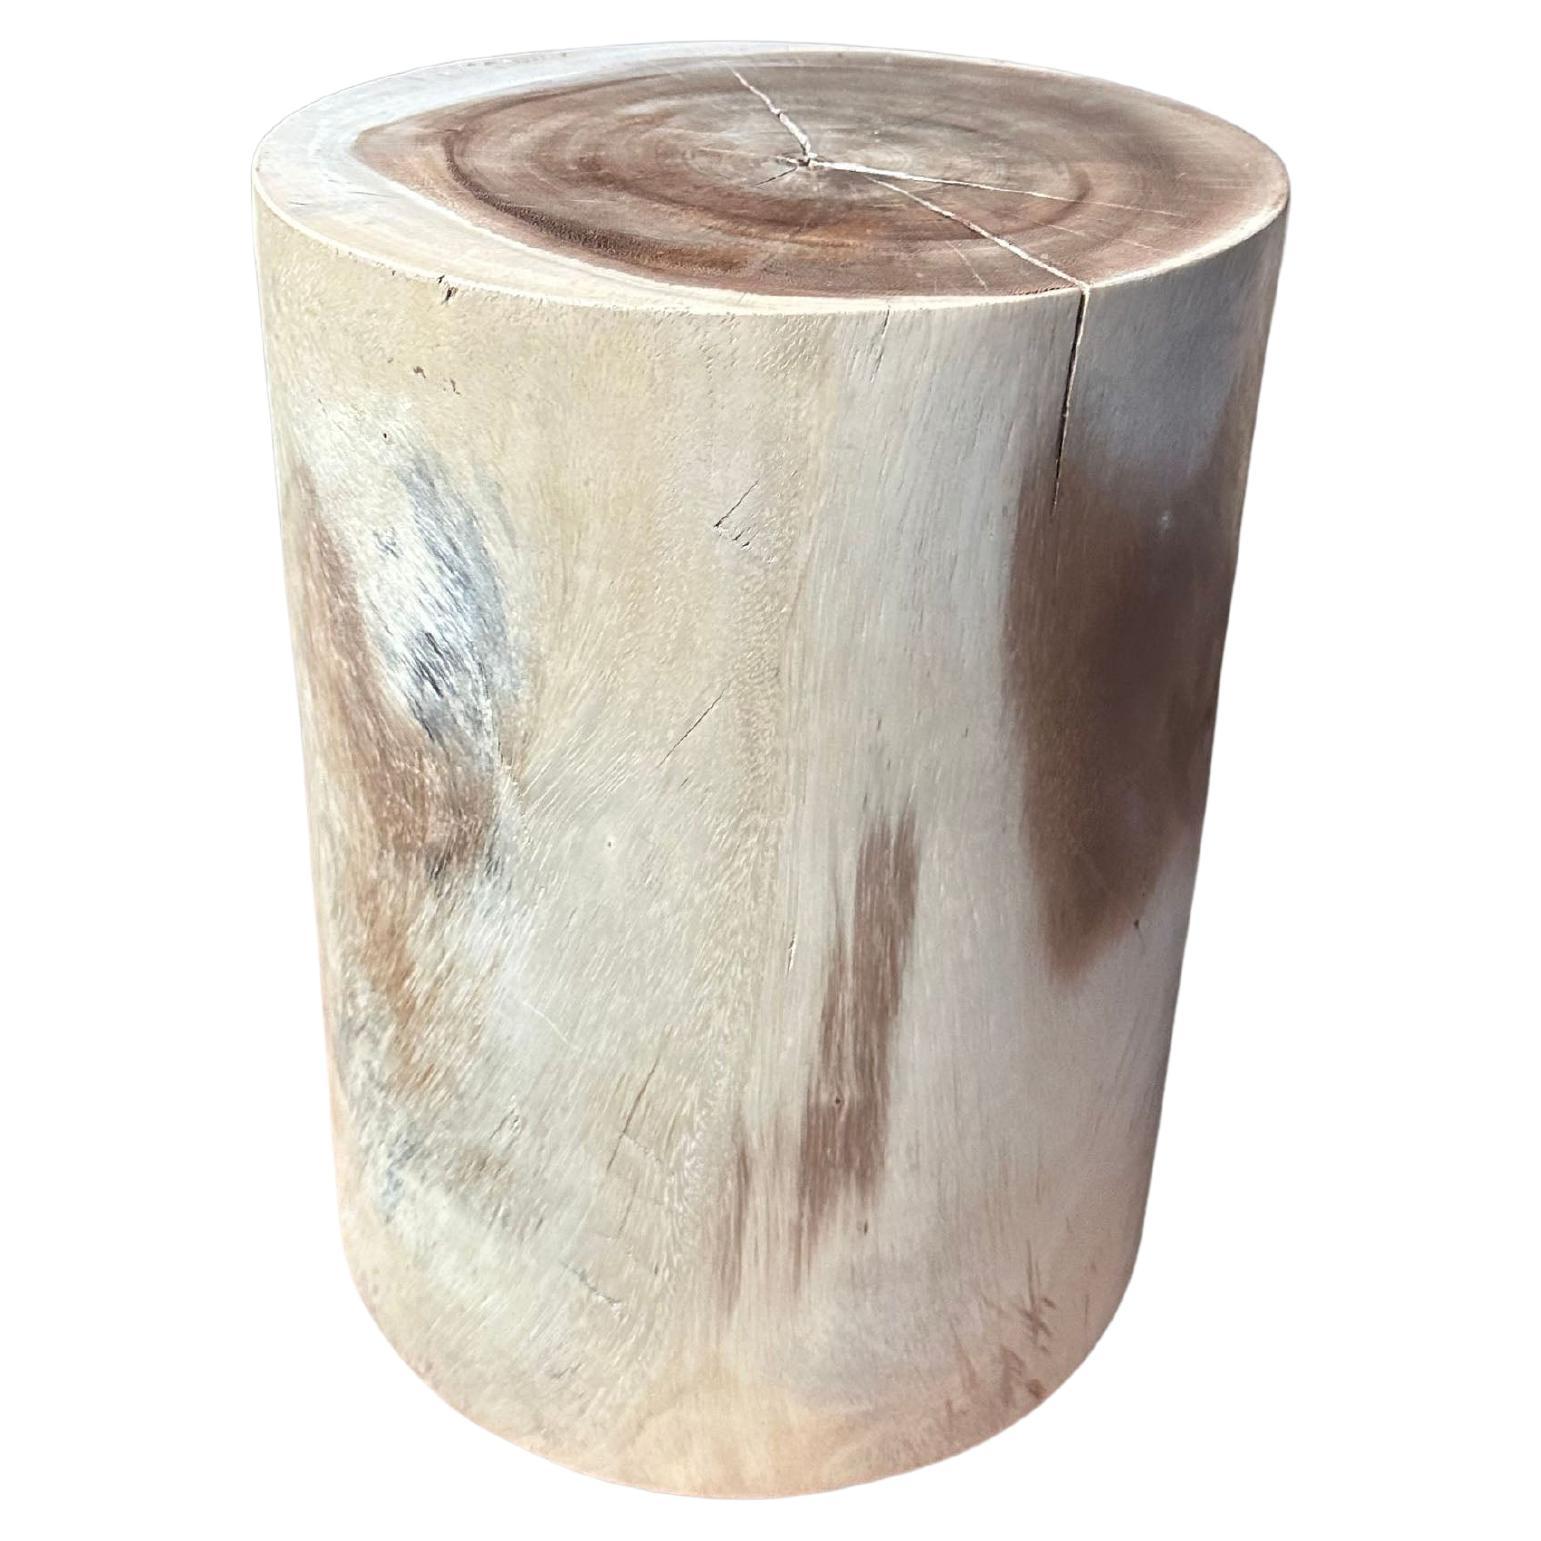 Sculptural Suar Wood Side Table, Hand-Crafted Modern Organic